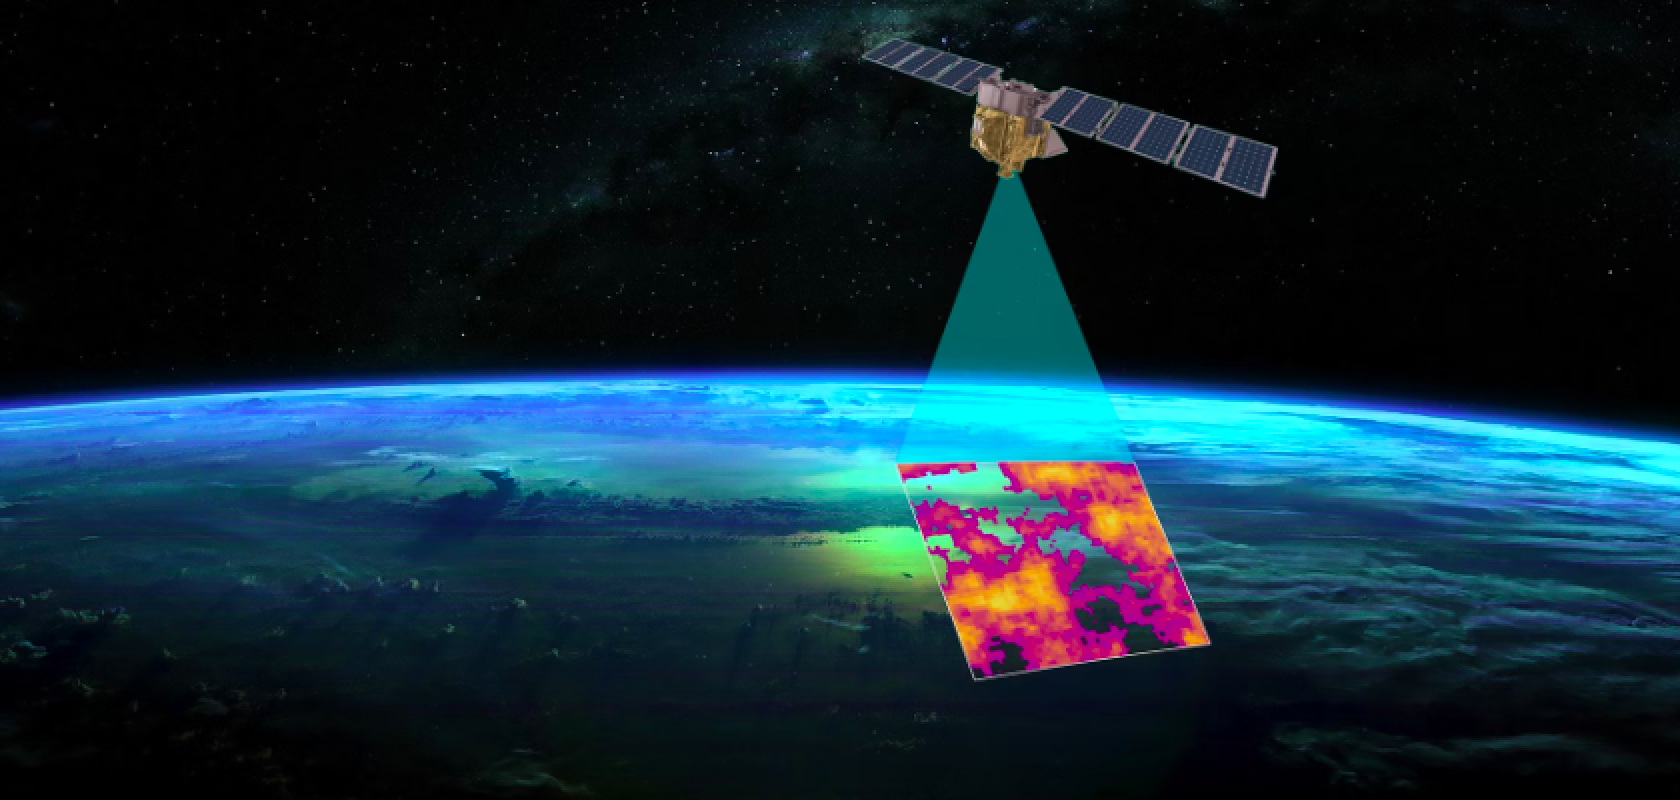 MethaneSAT will support the broad challenge of emissions by capturing data that will be publicly shared for free.